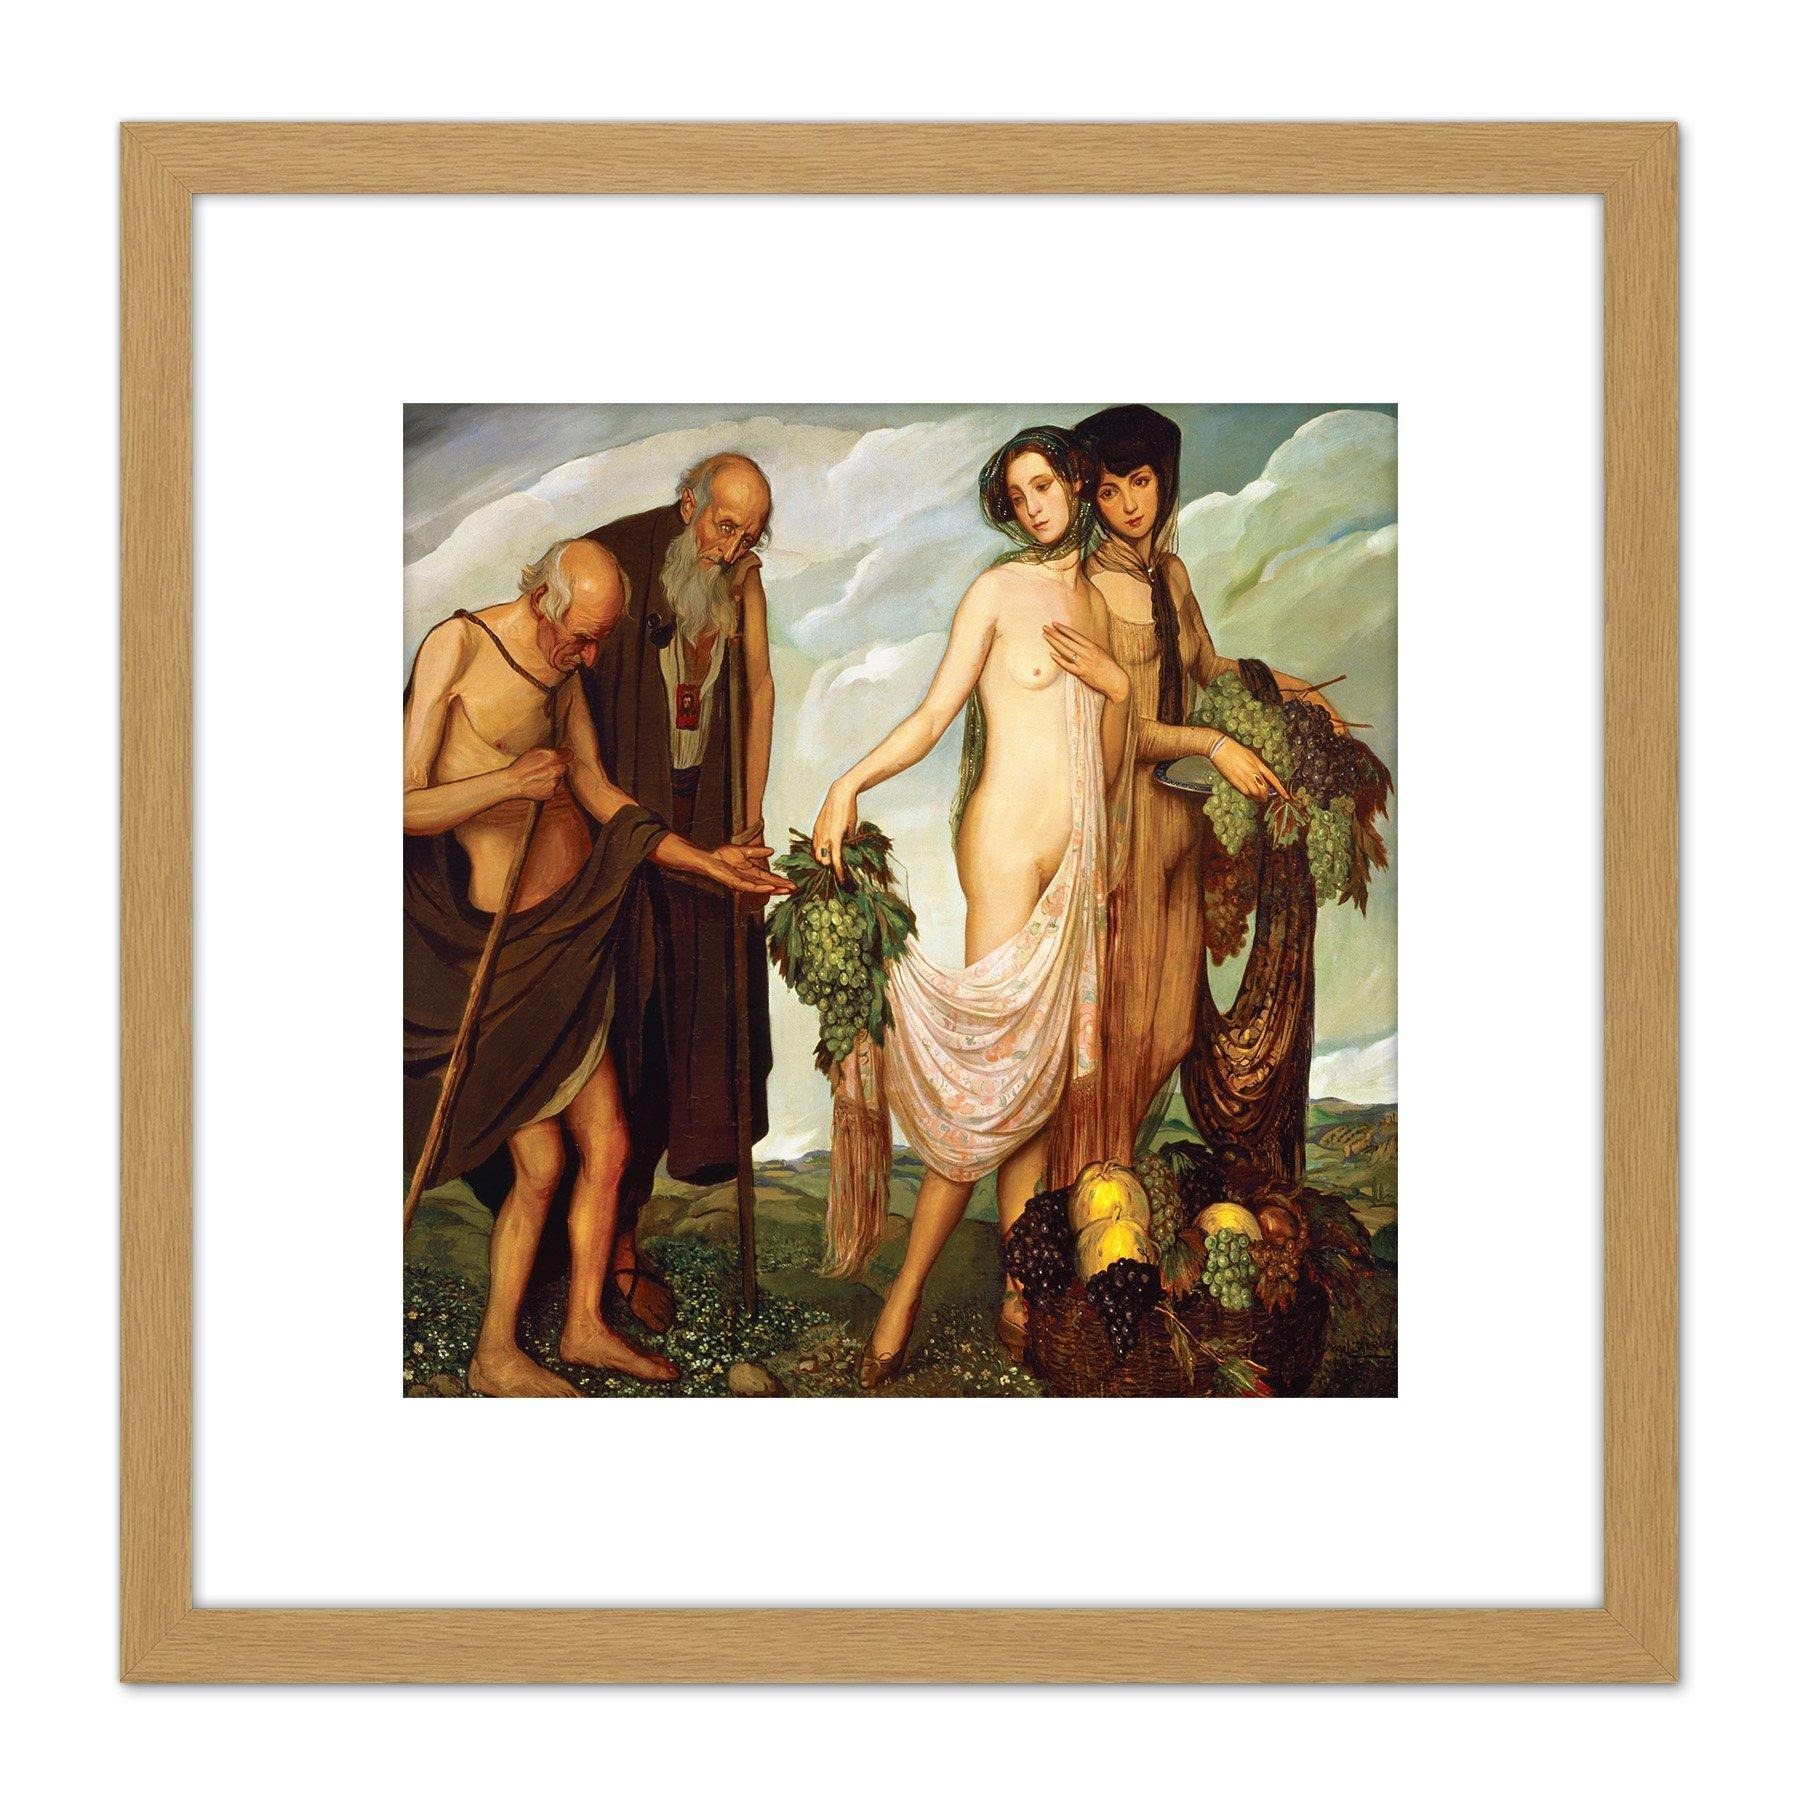 Angel Zarraga The Gift 8X8 Inch Square Wooden Framed Wall Art Print Picture with Mount - image 1